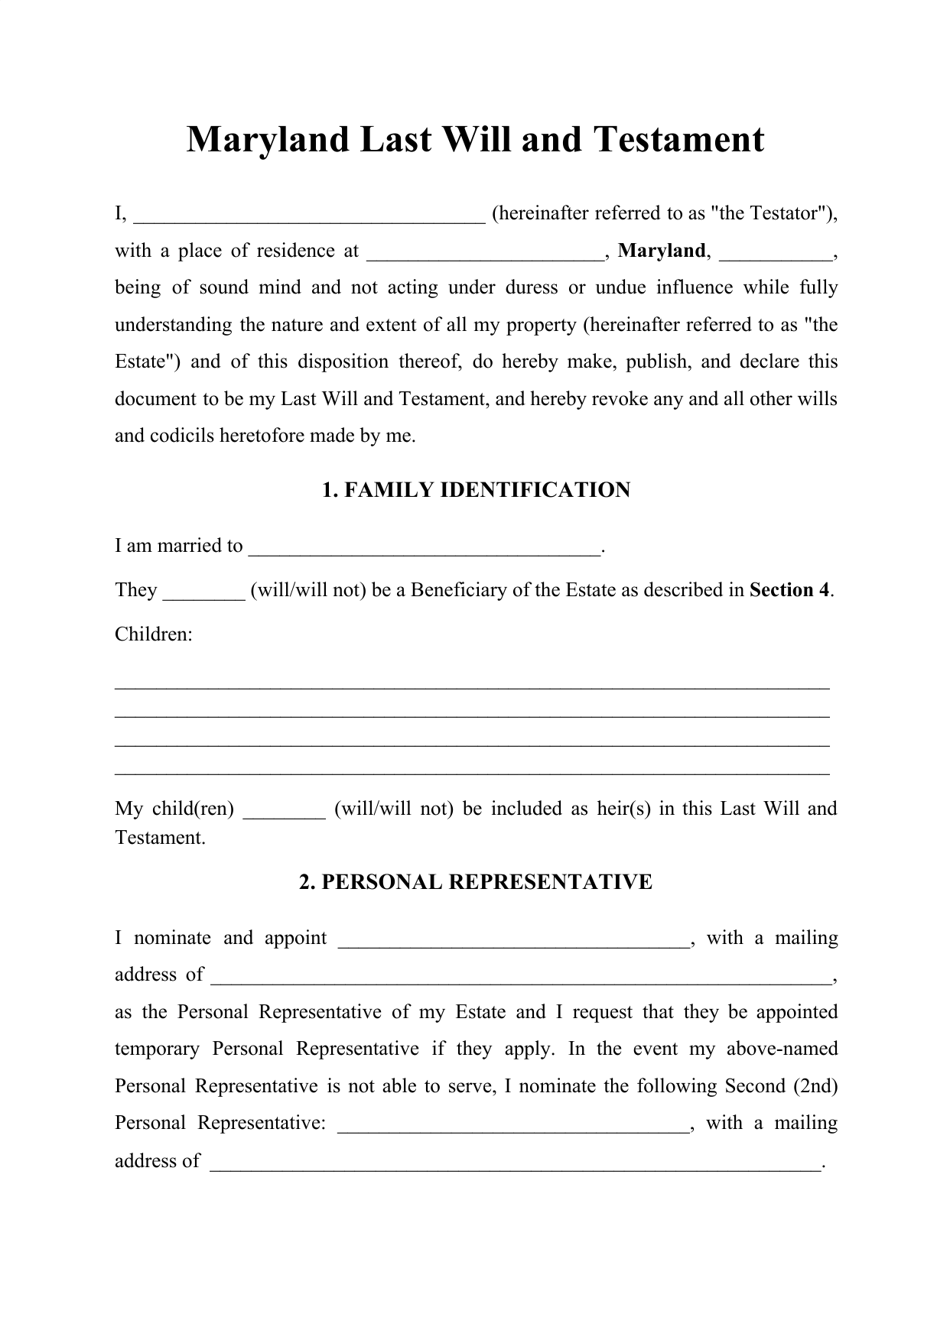 Maryland Last Will and Testament Template Download Printable PDF